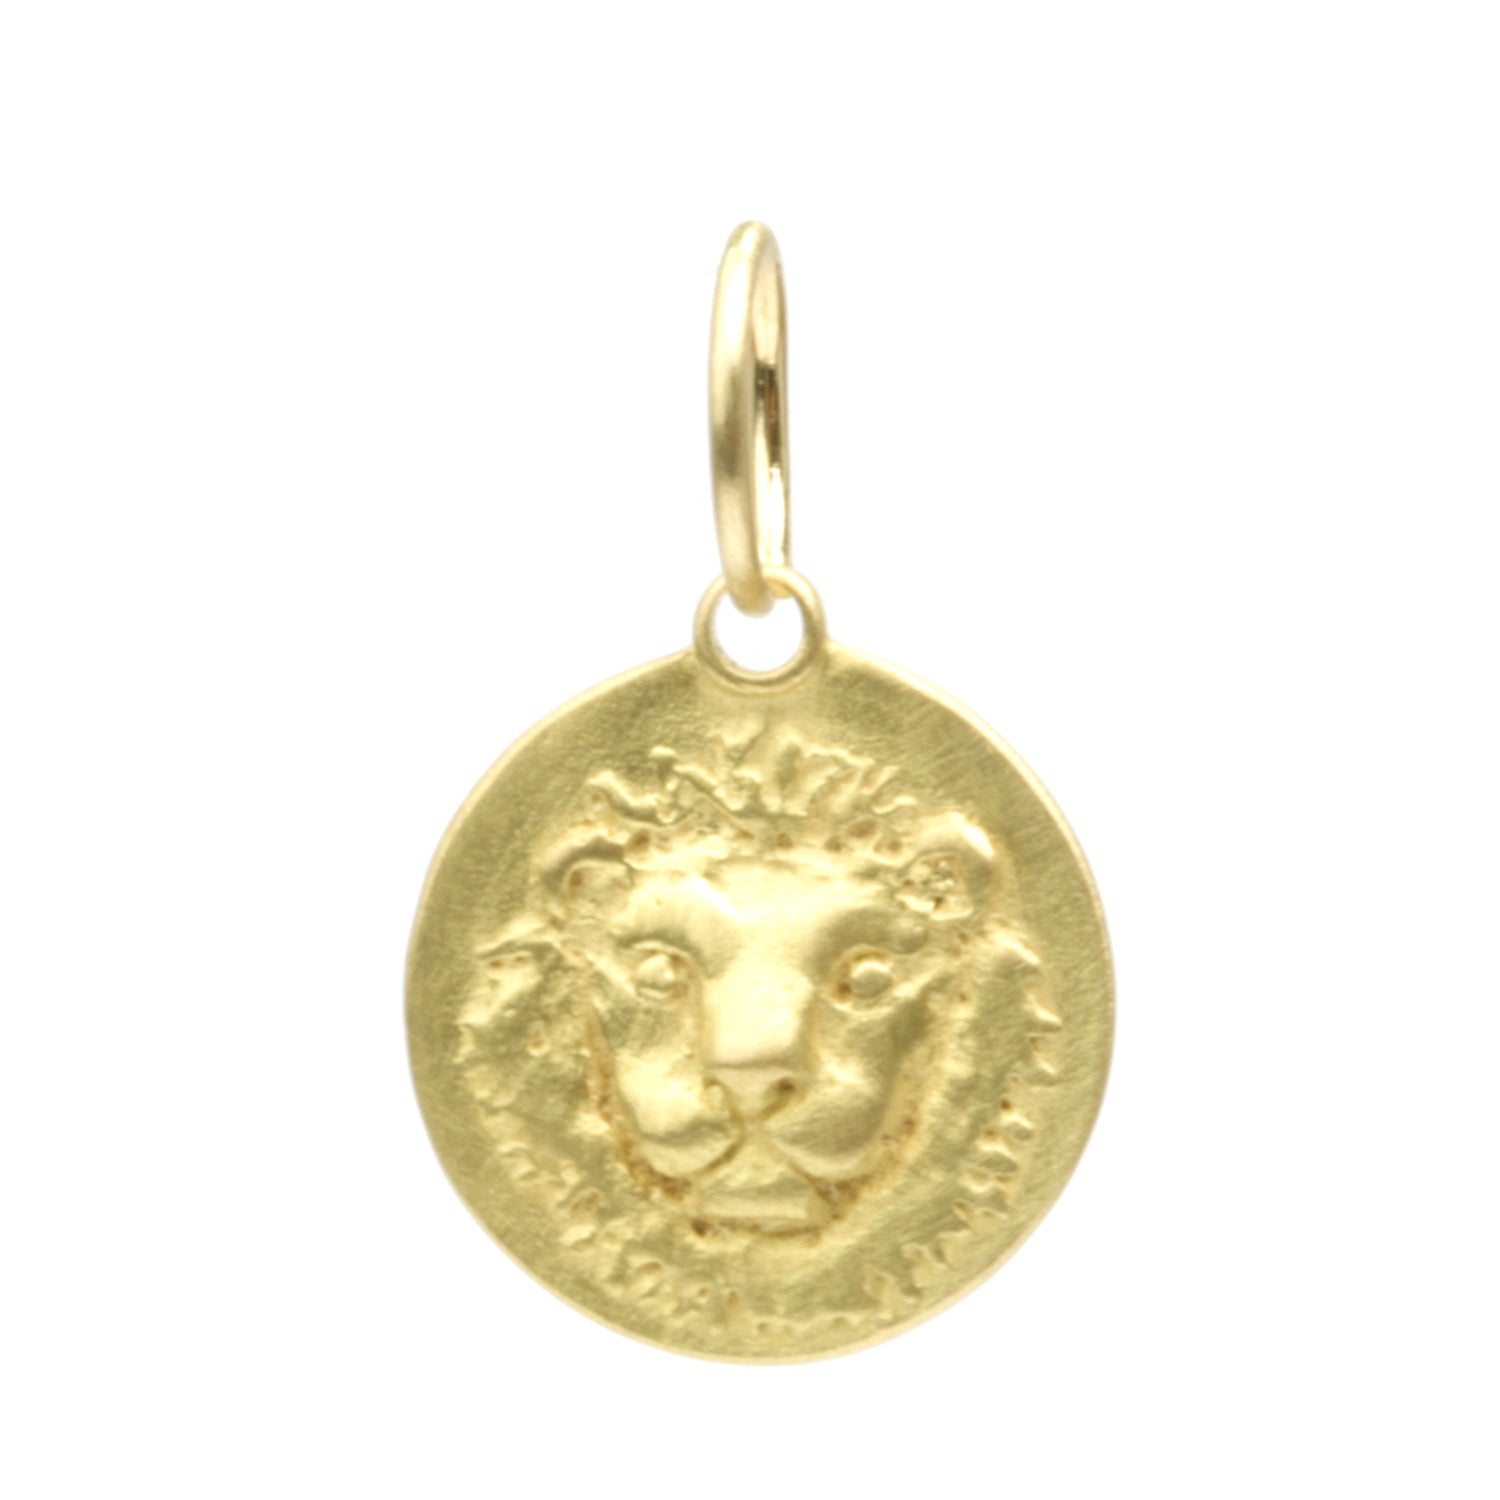 Leo Medal charm with large bale